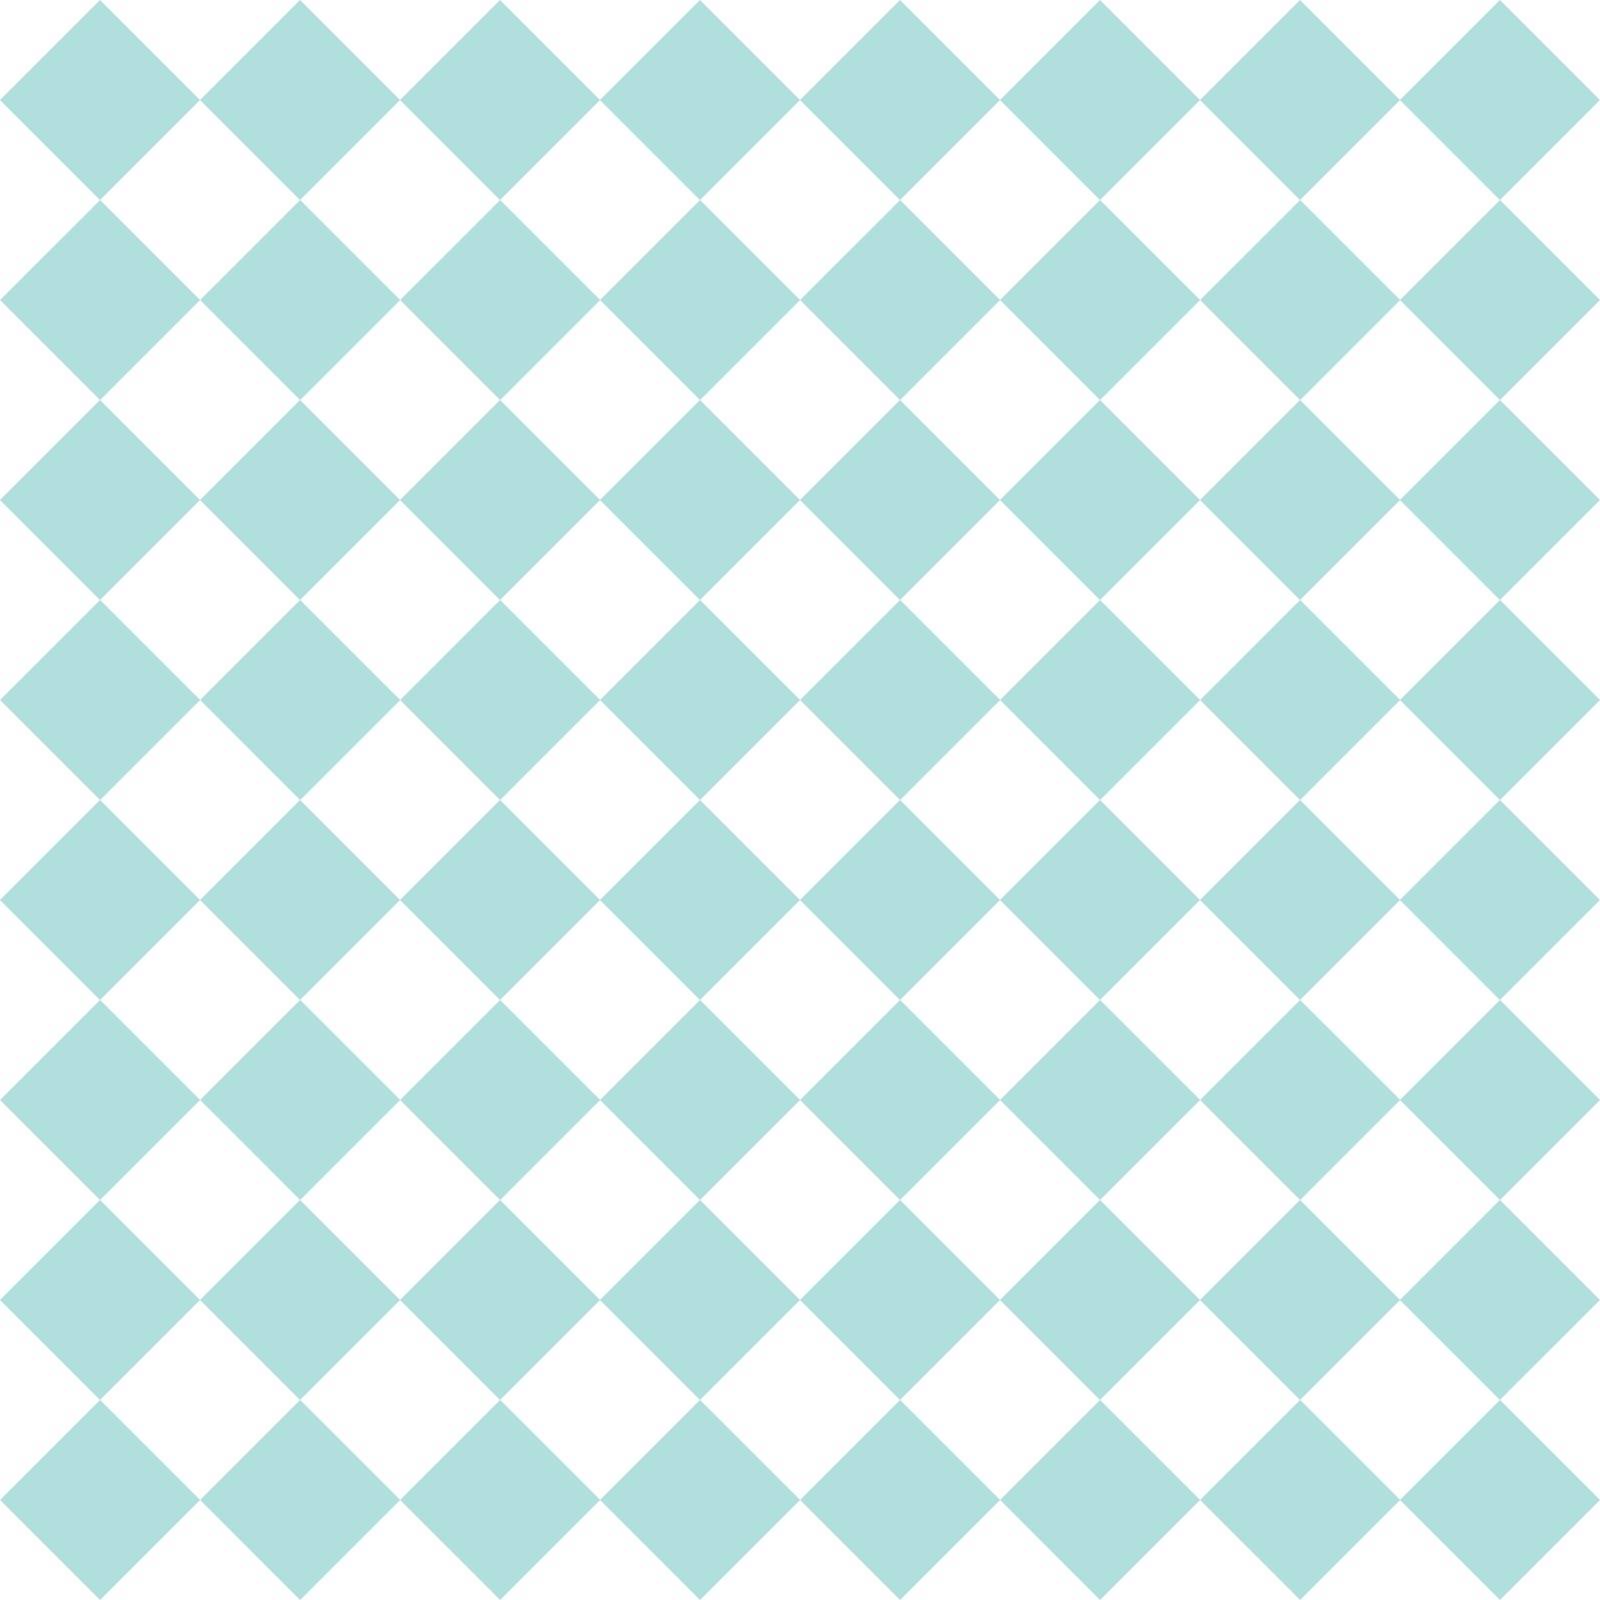 Checkered tile vector pattern or mint green and white wallpaper background